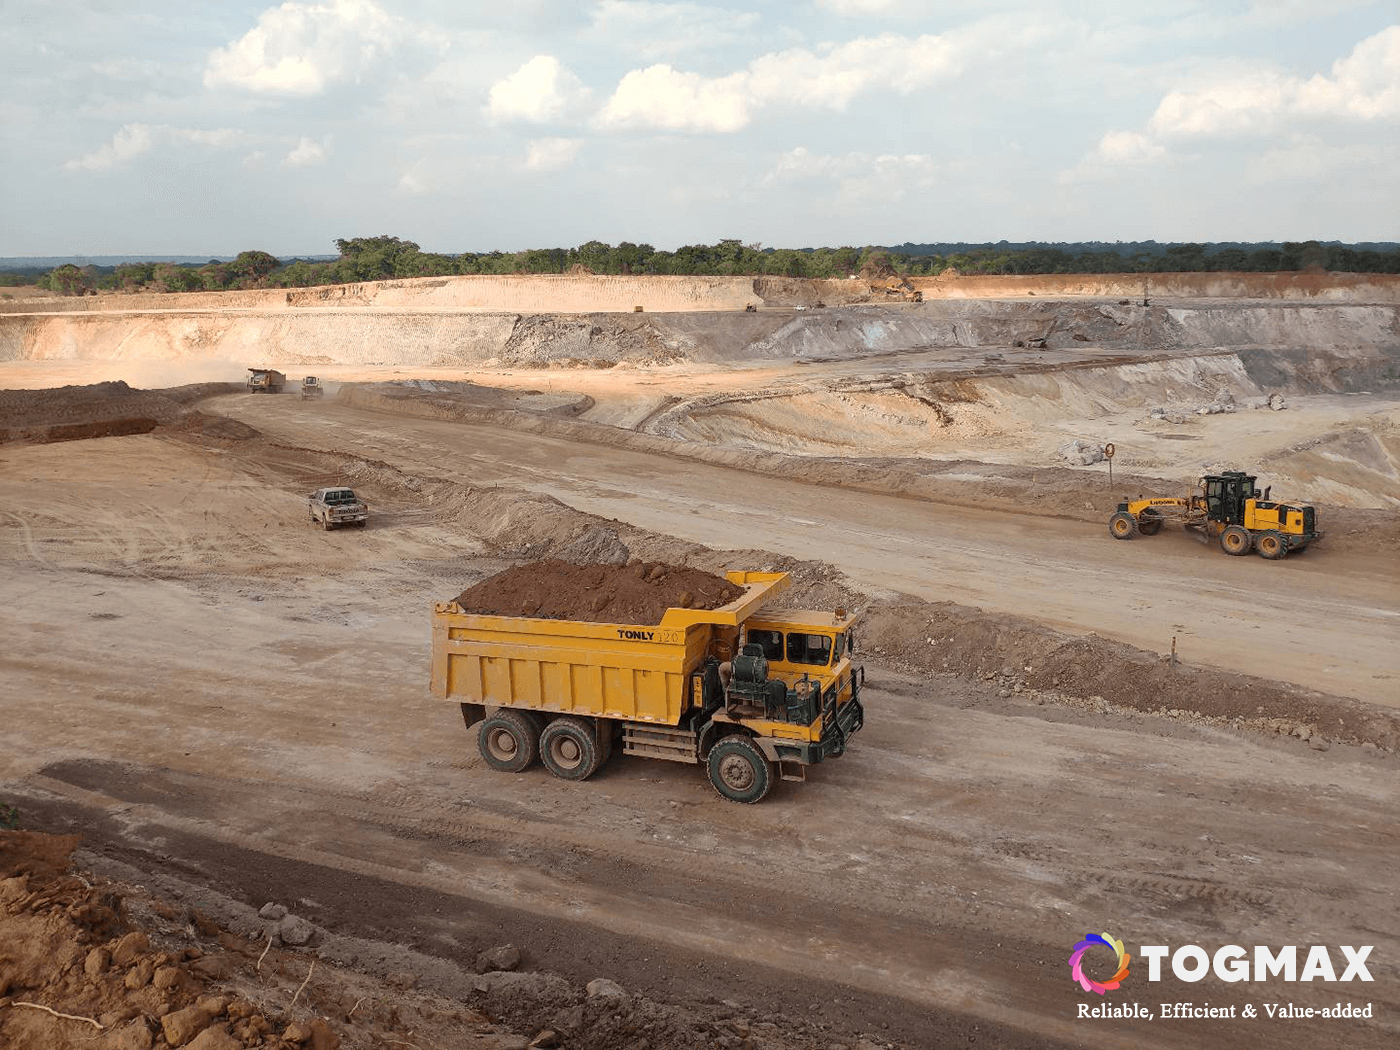 Tonly_TL875_Mining_Wide_Body_Dump_Trucks_Running_in_DRCongo_Copper_Cobalt_Mines_TogMax_Group